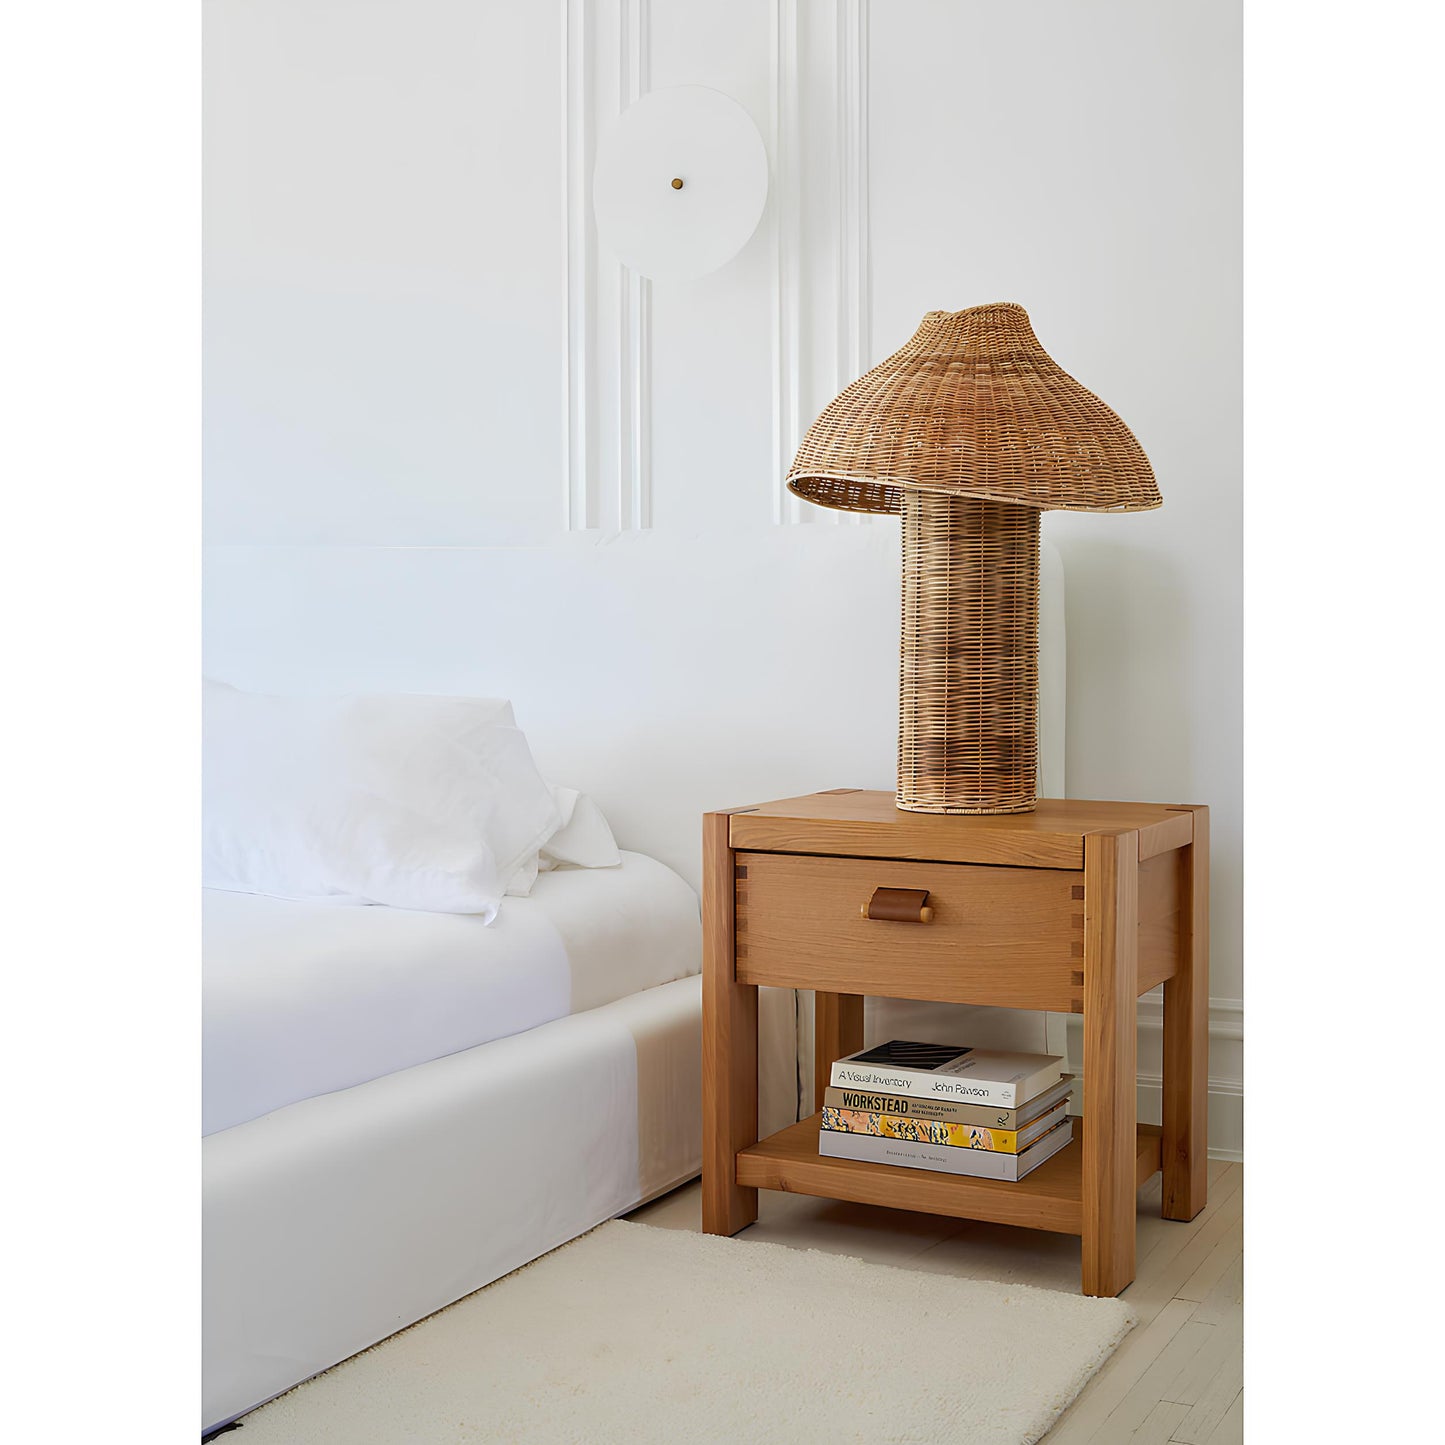 Rattan Table lamp for Living room | Bamboo Bedside table lamp | Cane Table lamp -Anant - Akway